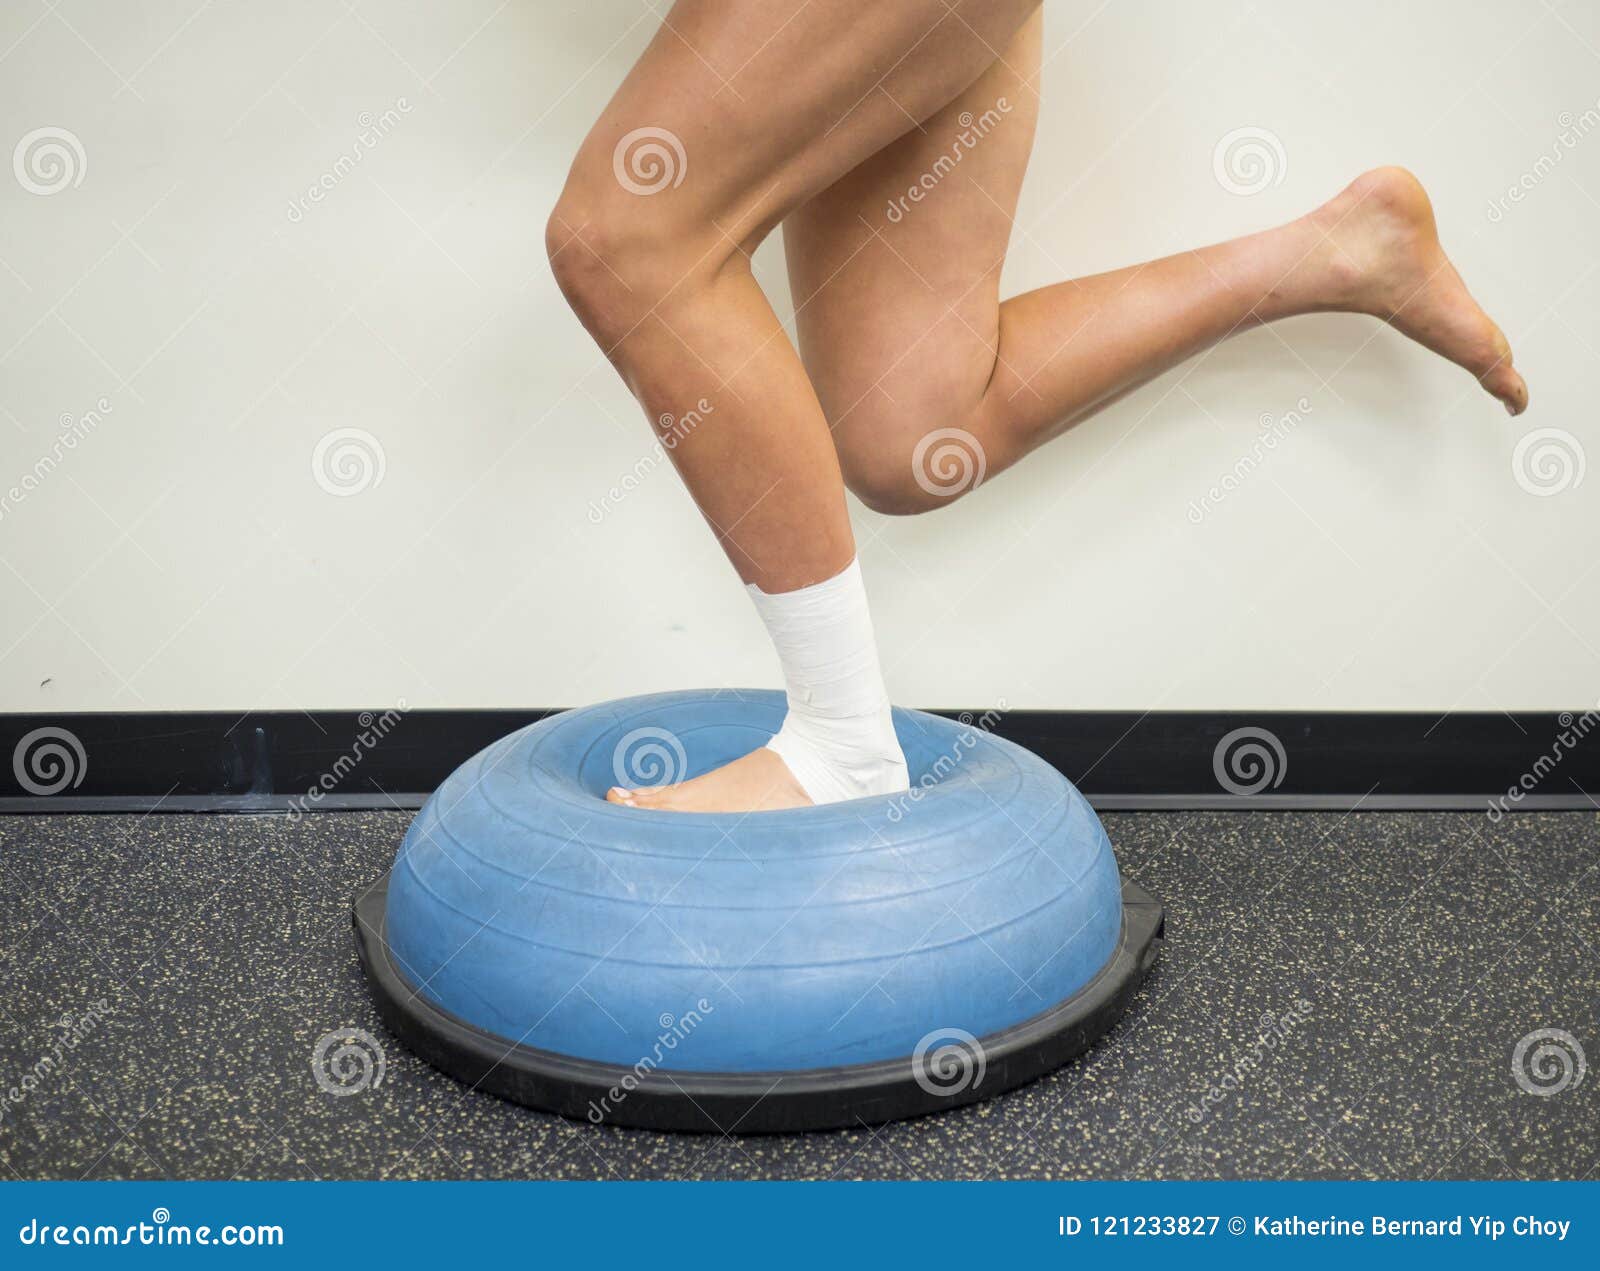 athlete with a sprained ankle doing strengthening and balance exercises on a bosu ball